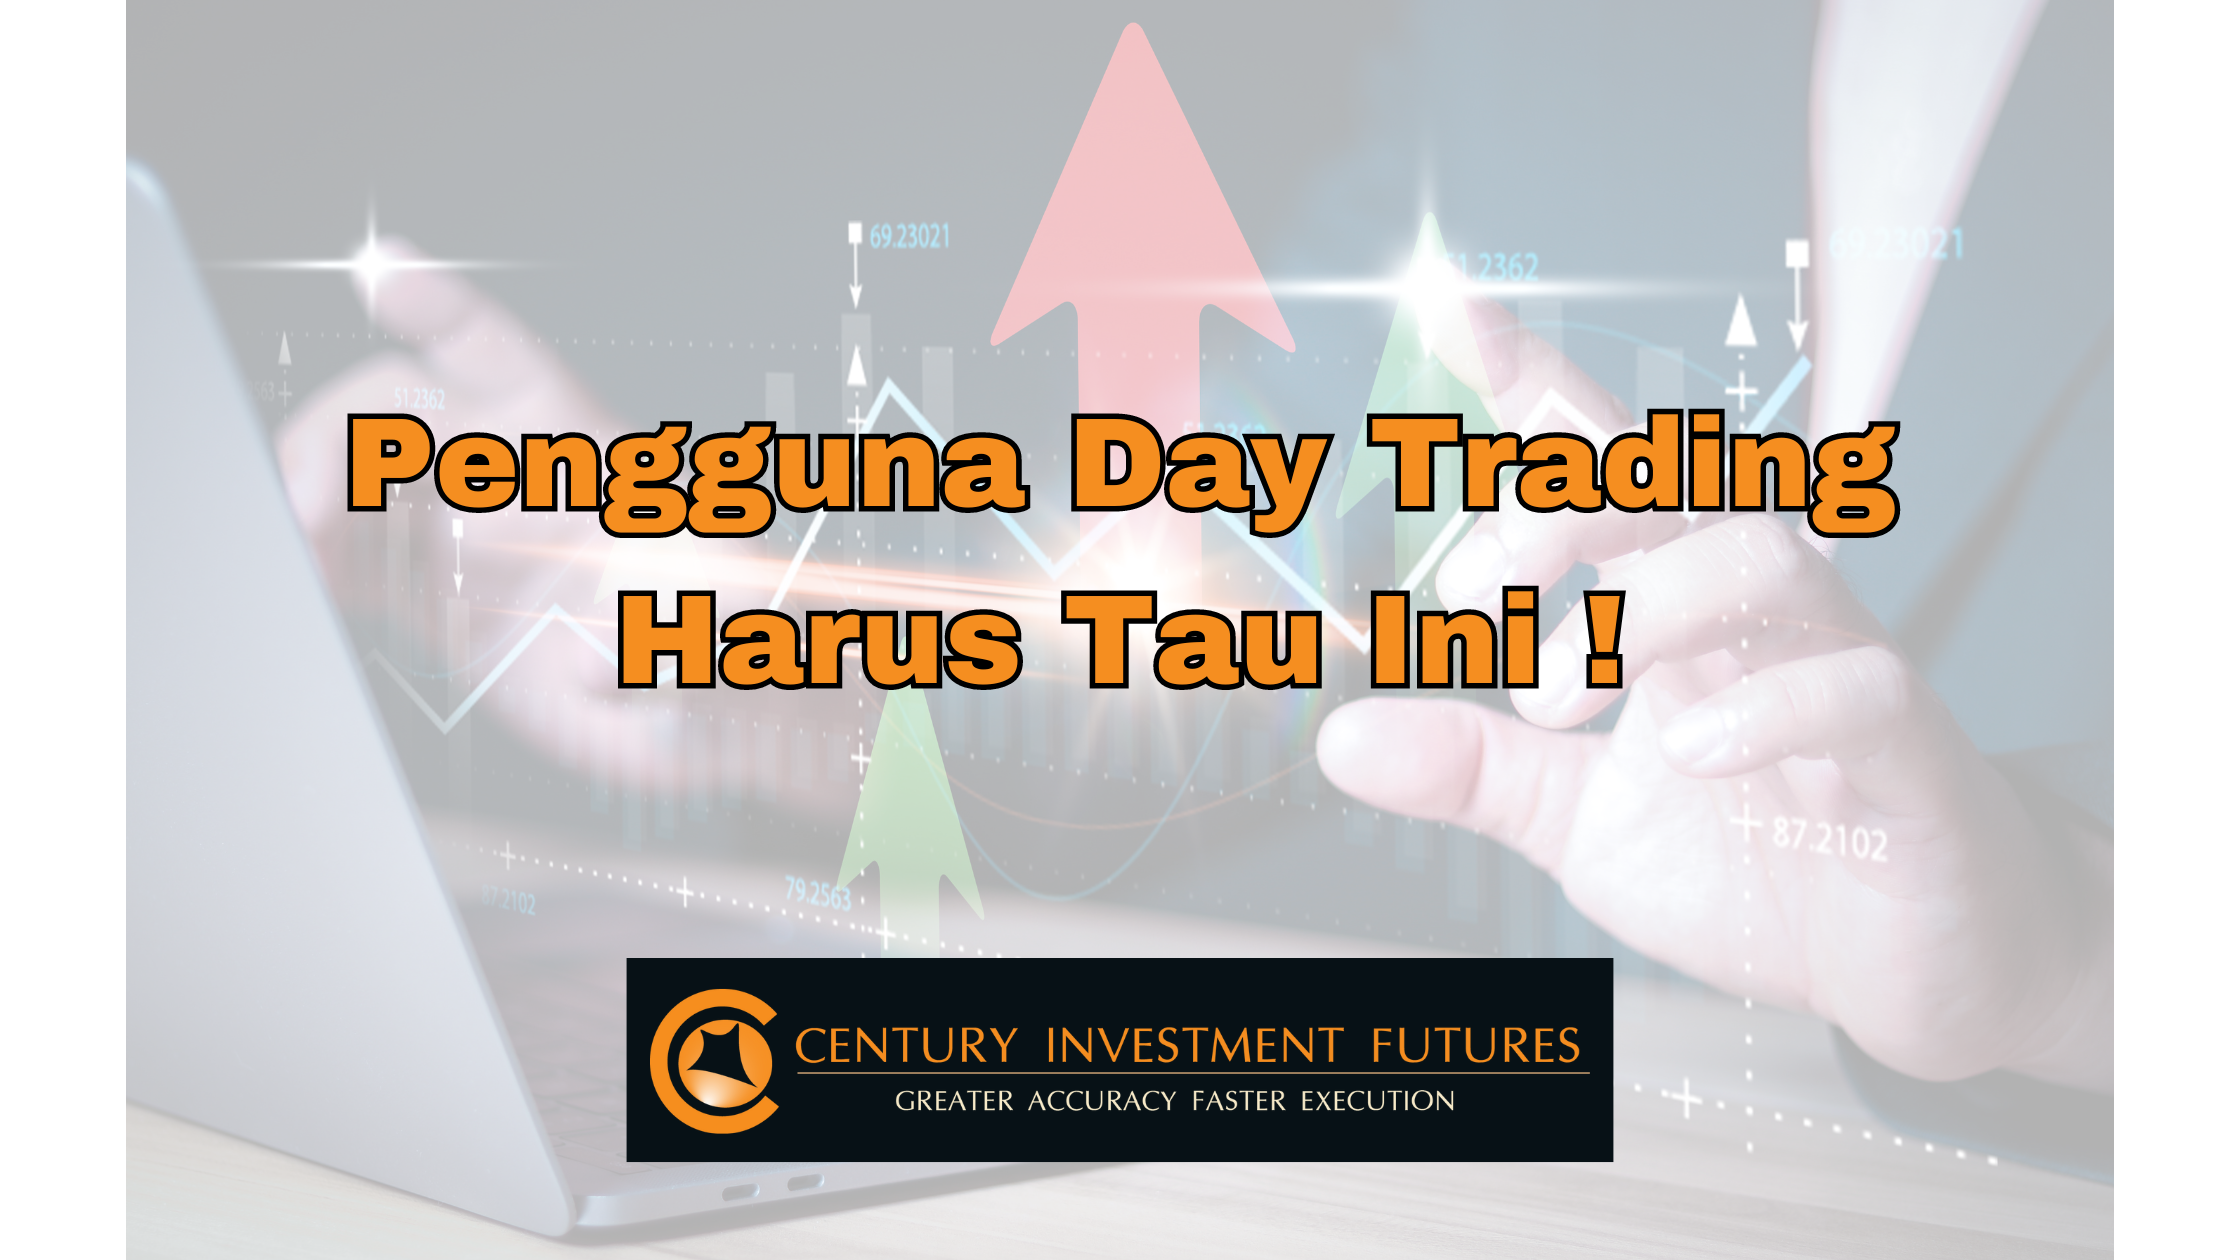 Day Trading Strategy